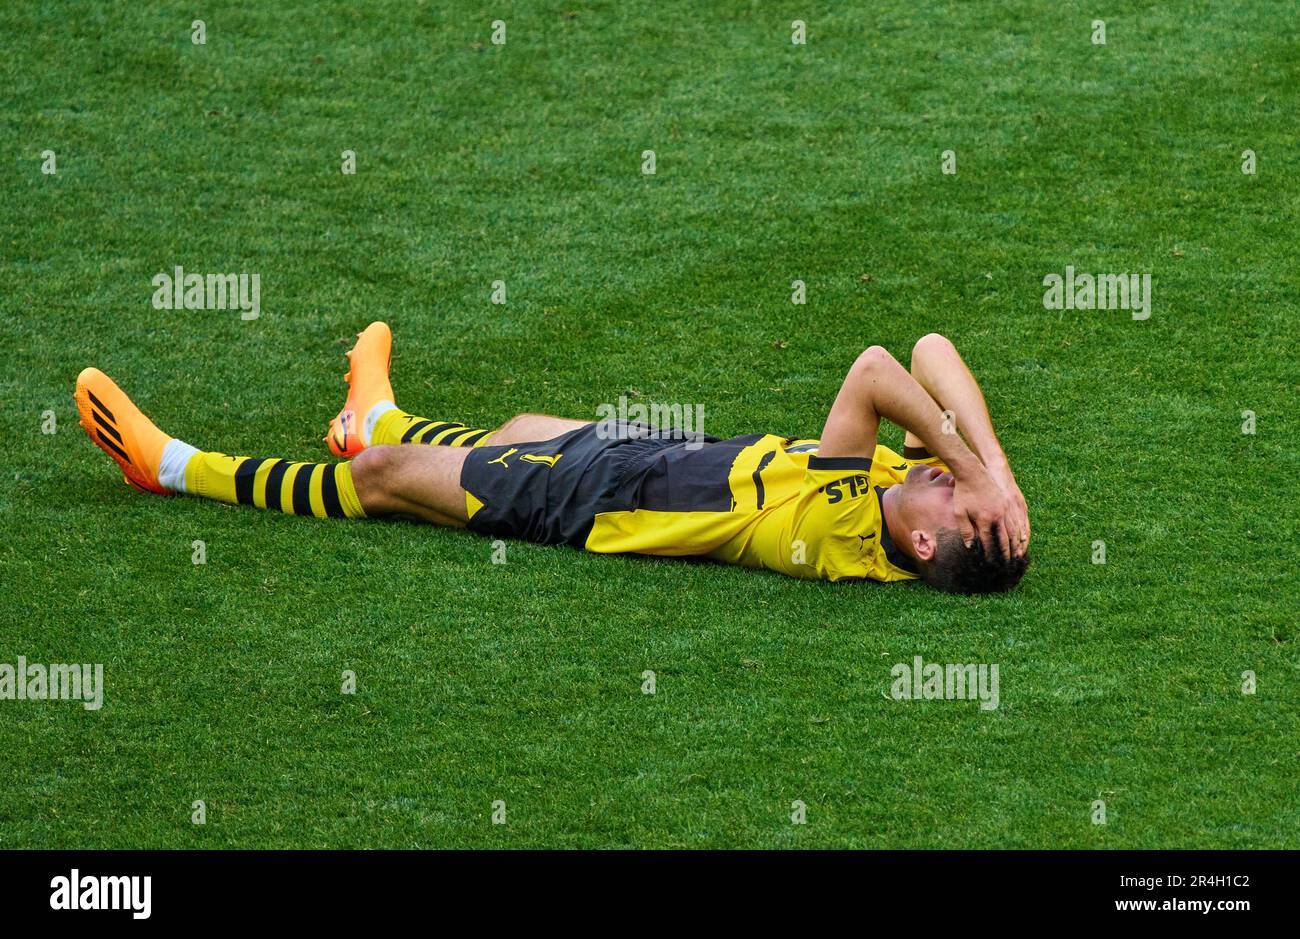 Giovanni Reyna, BVB 7  sad after the match BORUSSIA DORTMUND - FSV MAINZ 05 2-2, BVB lost the chance for the title. 1.German Football League on May 27, 2023 in Dortmund, Germany. Season 2022/2023, matchday 34, 1.Bundesliga, 34.Spieltag, BVB, MZ,  © Peter Schatz / Alamy Live News    - DFL REGULATIONS PROHIBIT ANY USE OF PHOTOGRAPHS as IMAGE SEQUENCES and/or QUASI-VIDEO - Stock Photo